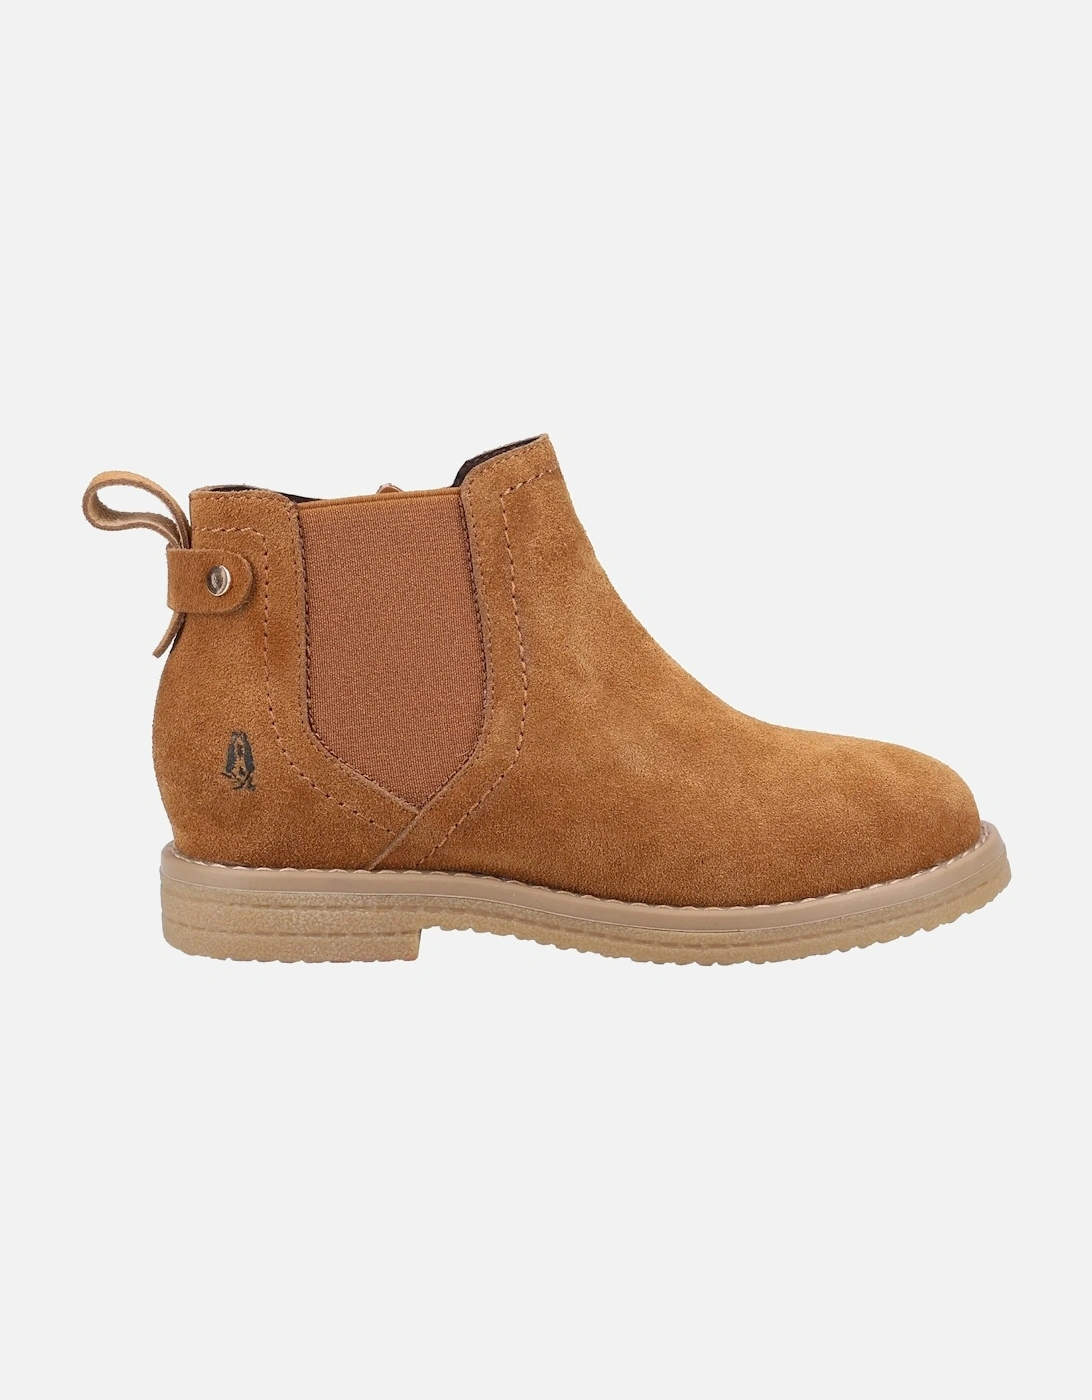 Girls Mini Maddy Suede Ankle Boots